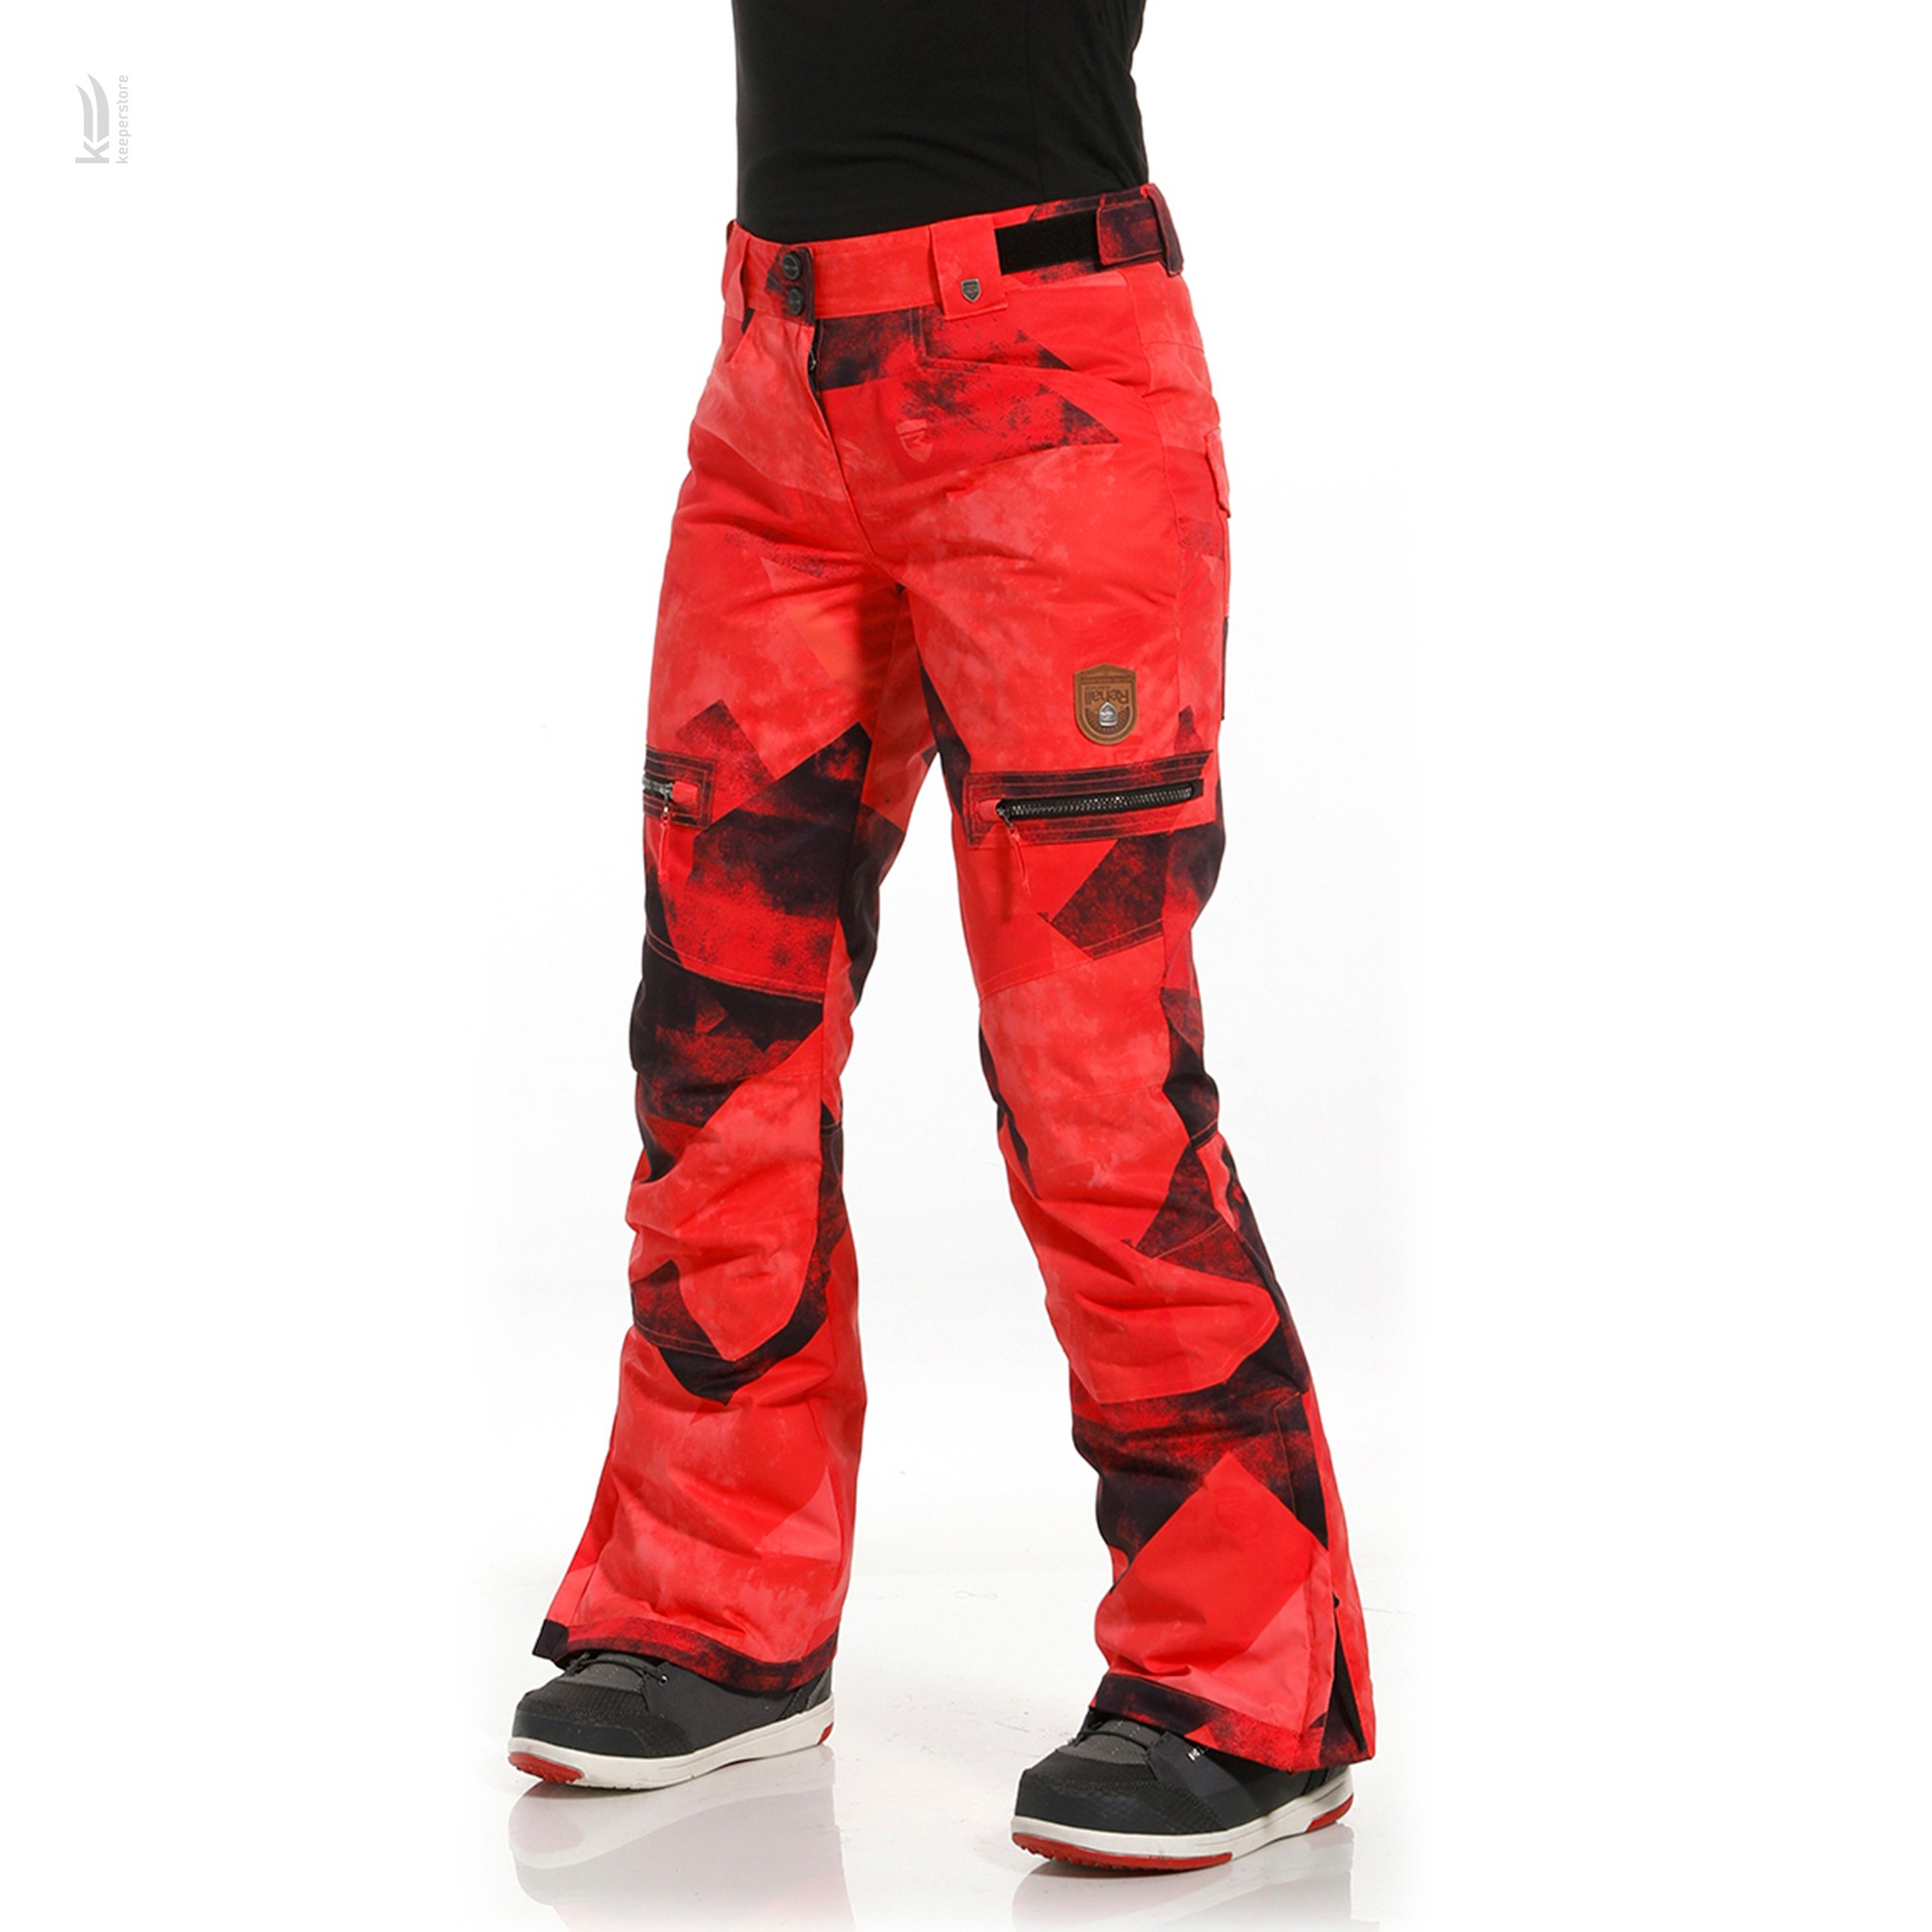 Rehall KEELY-R Snowpants Womens Graphic Mountains Red Pink (S)